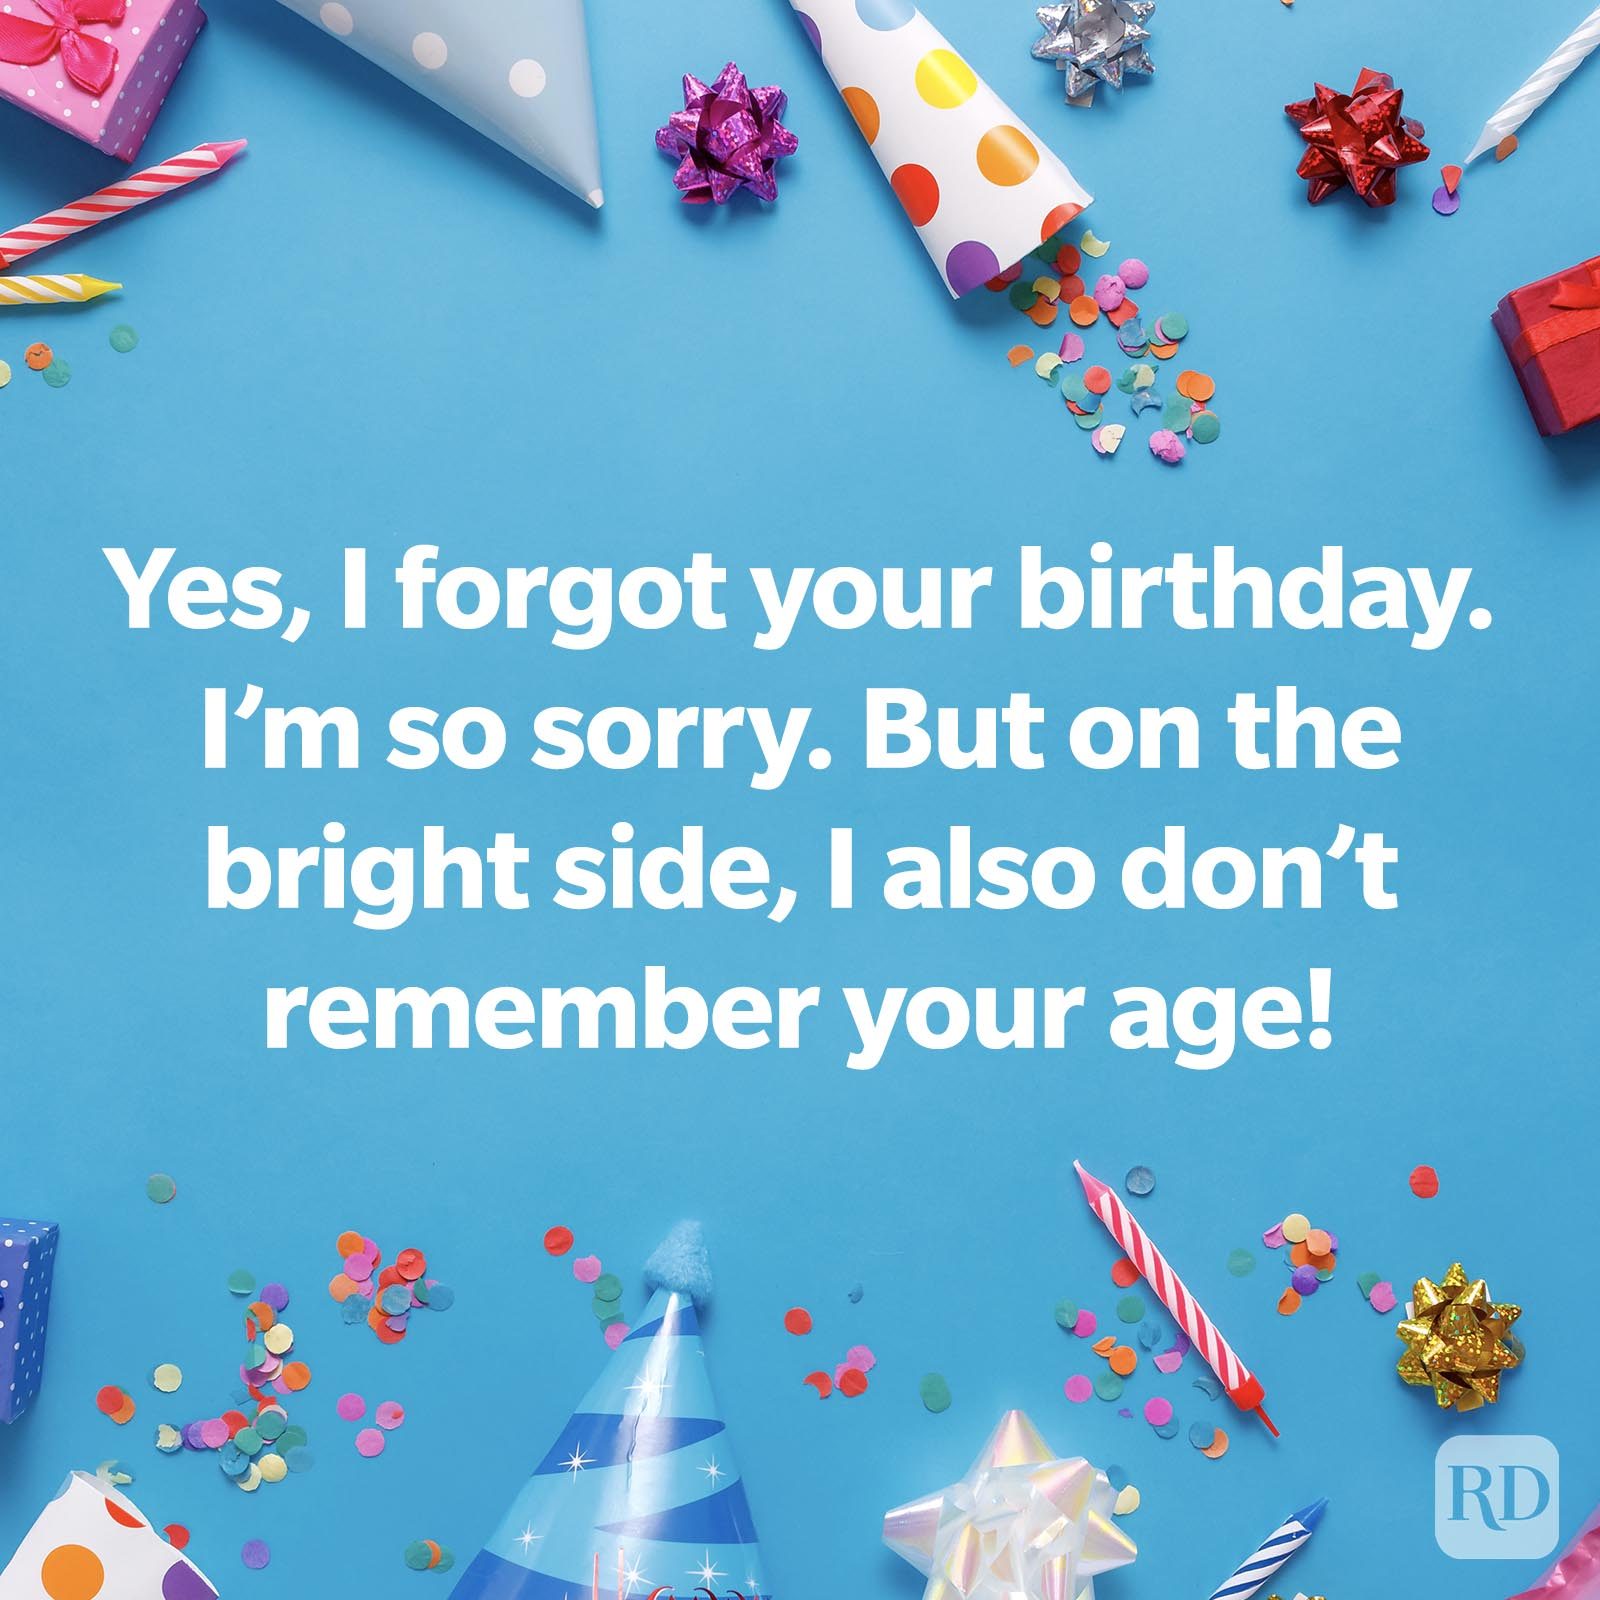 100-Belated-Birthday-Wishes-1-Funny-GettyImages-1227425951.jpg